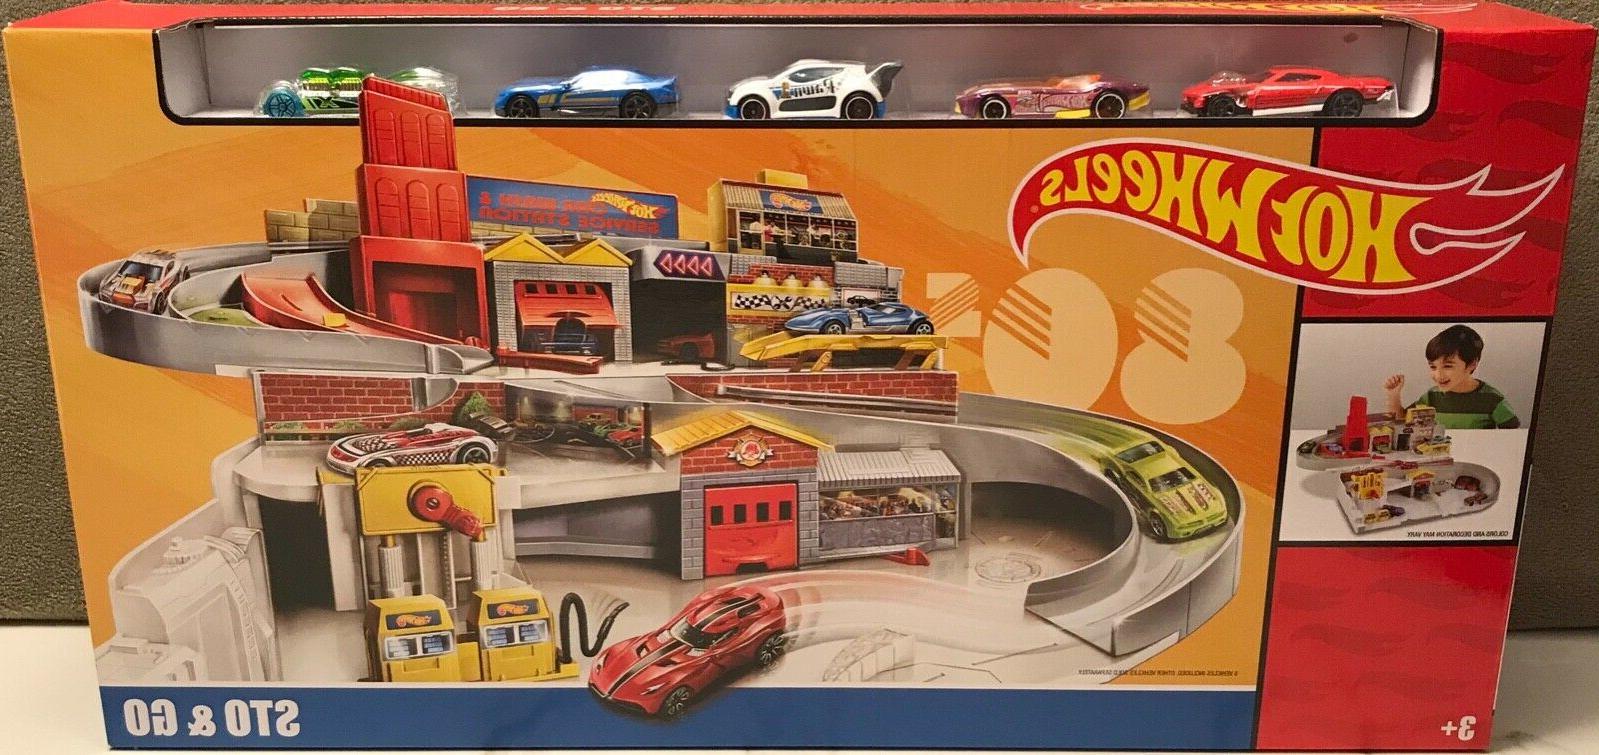 hot wheels sto and go garage